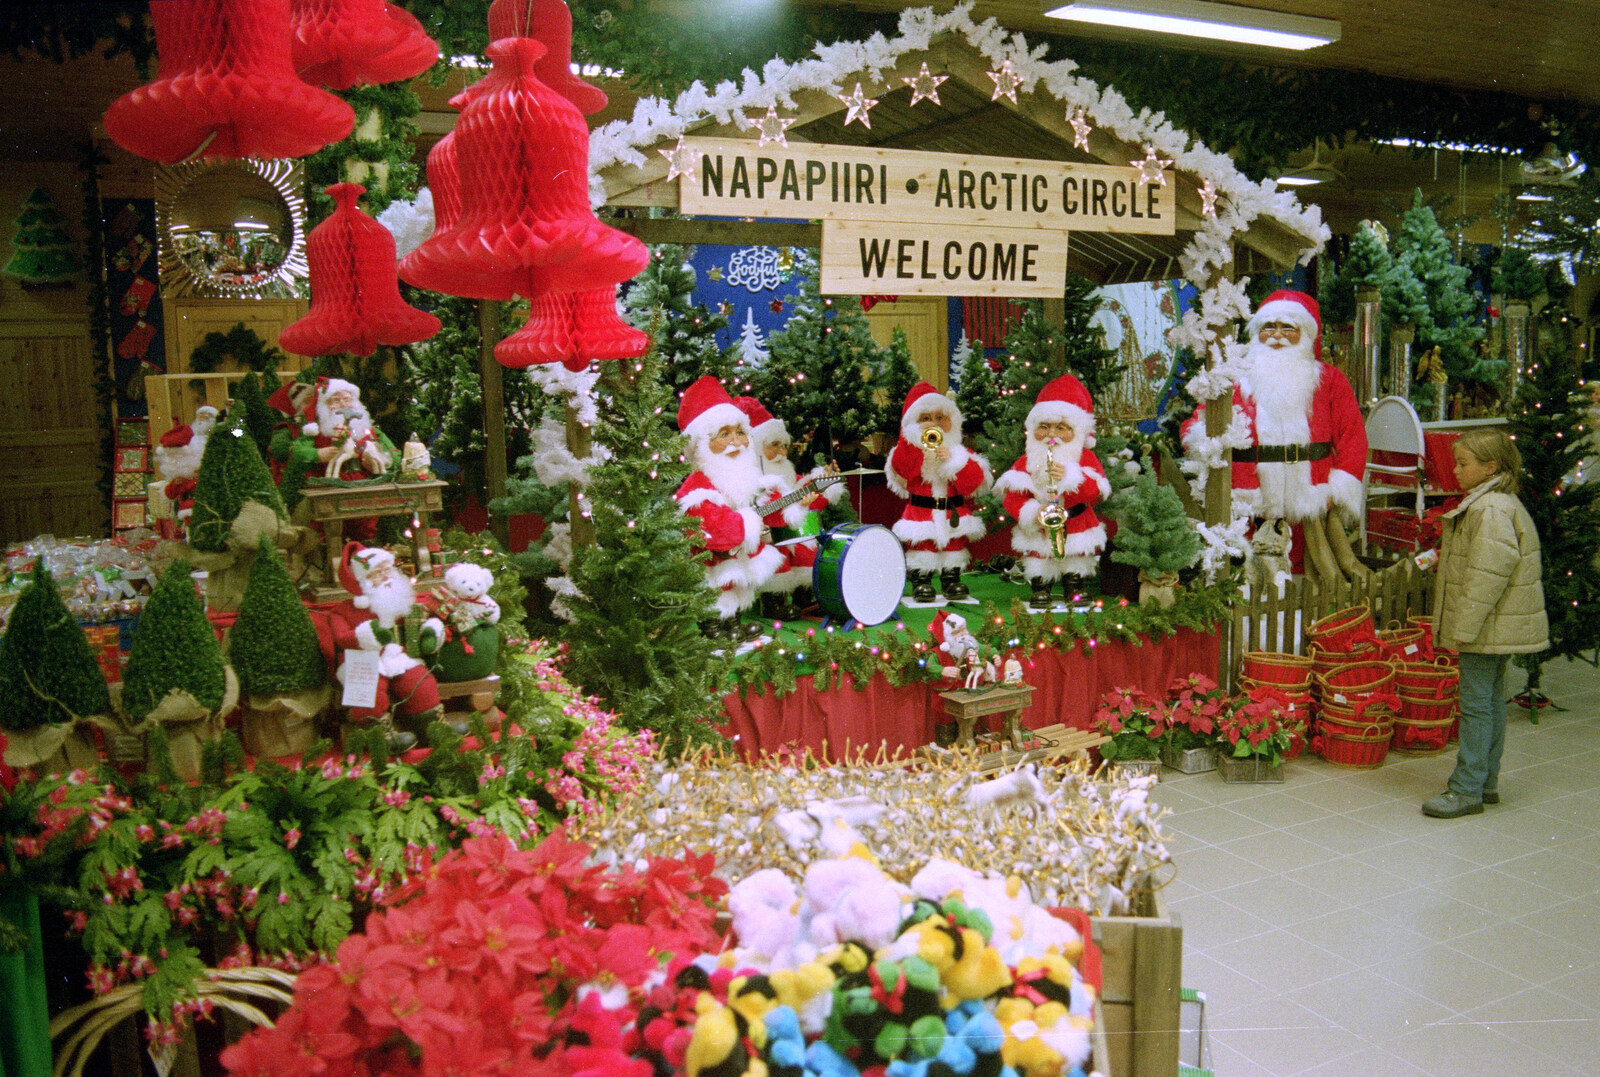 Mad Christmas stuff in Napapiiri from A Trip to Rovaniemi and the Arctic Circle, Lapland, Finland - 28th November 1999